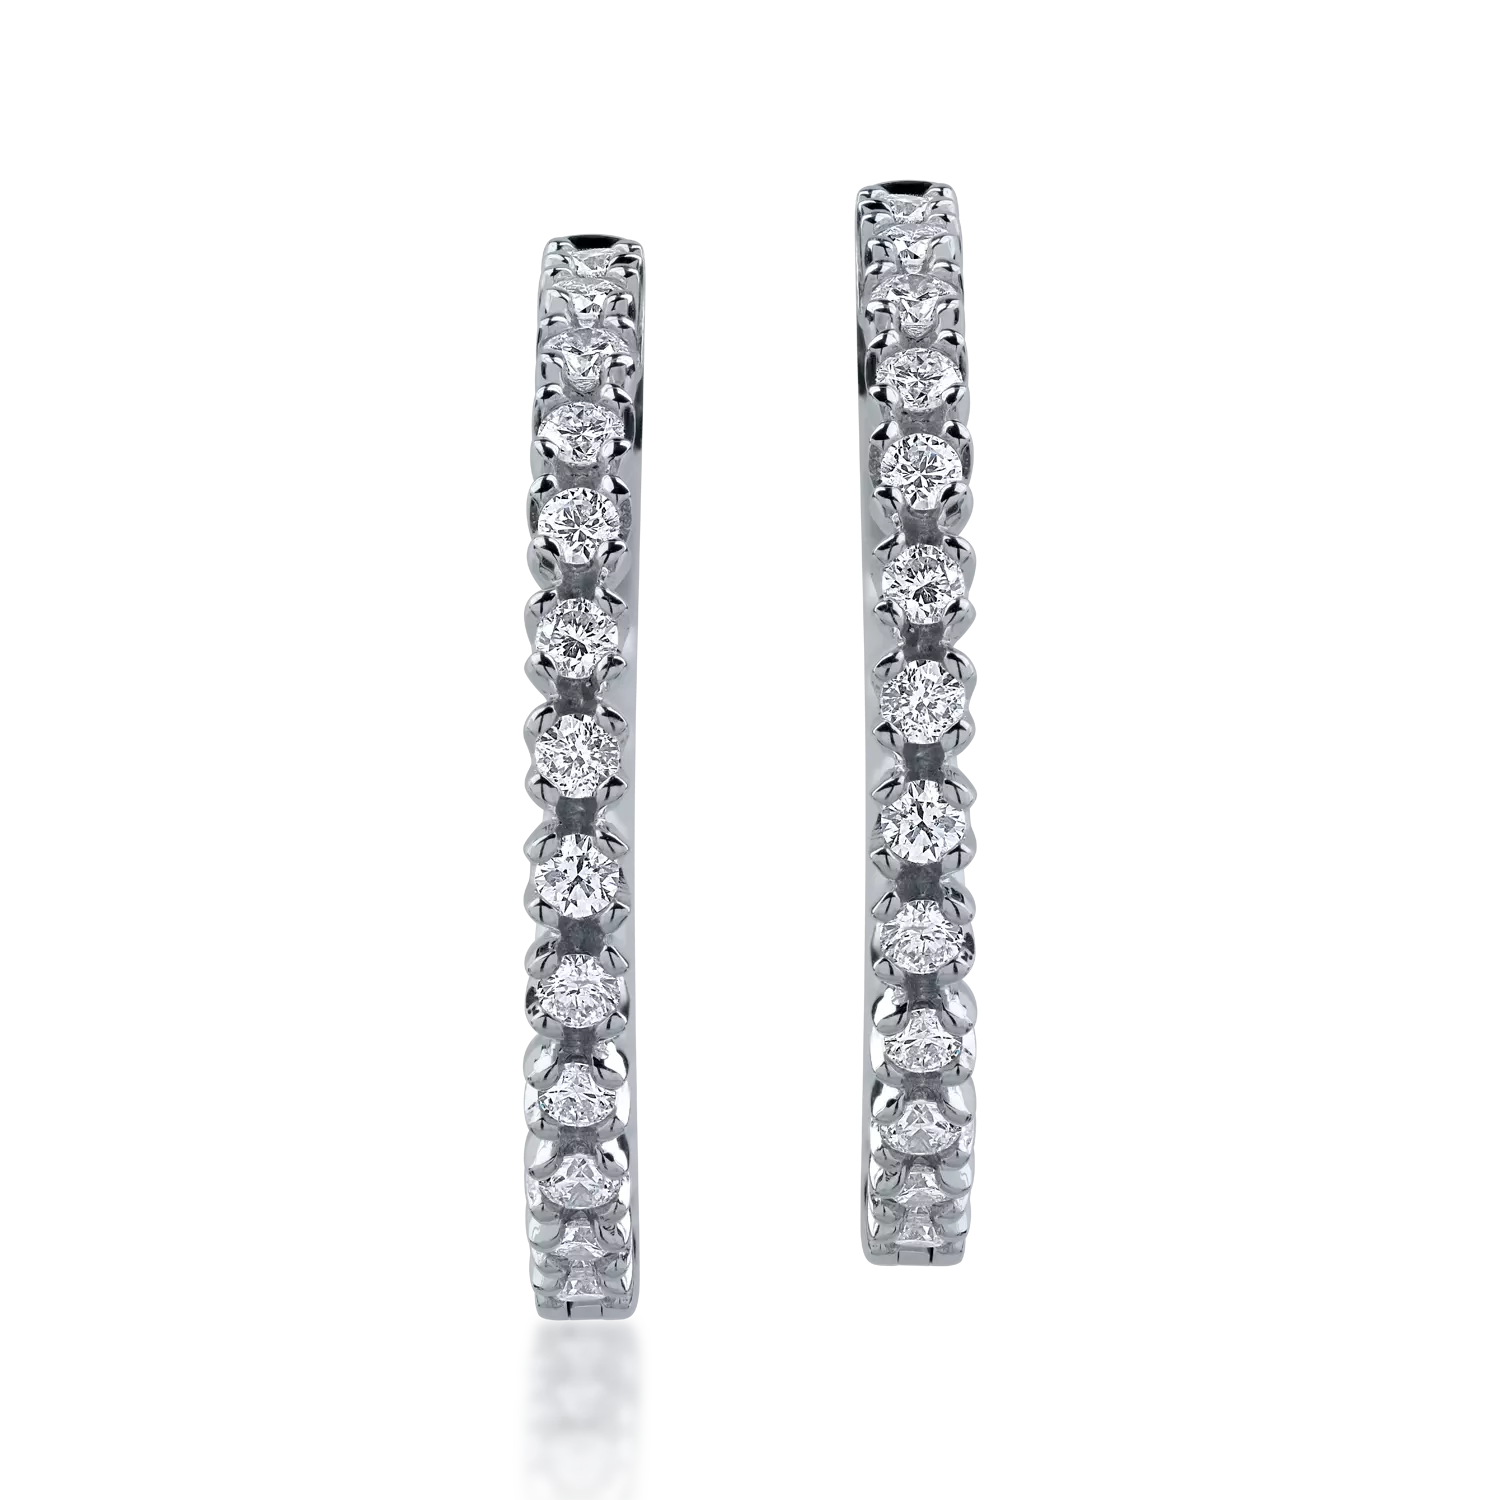 White gold earrings with 1.91ct diamonds